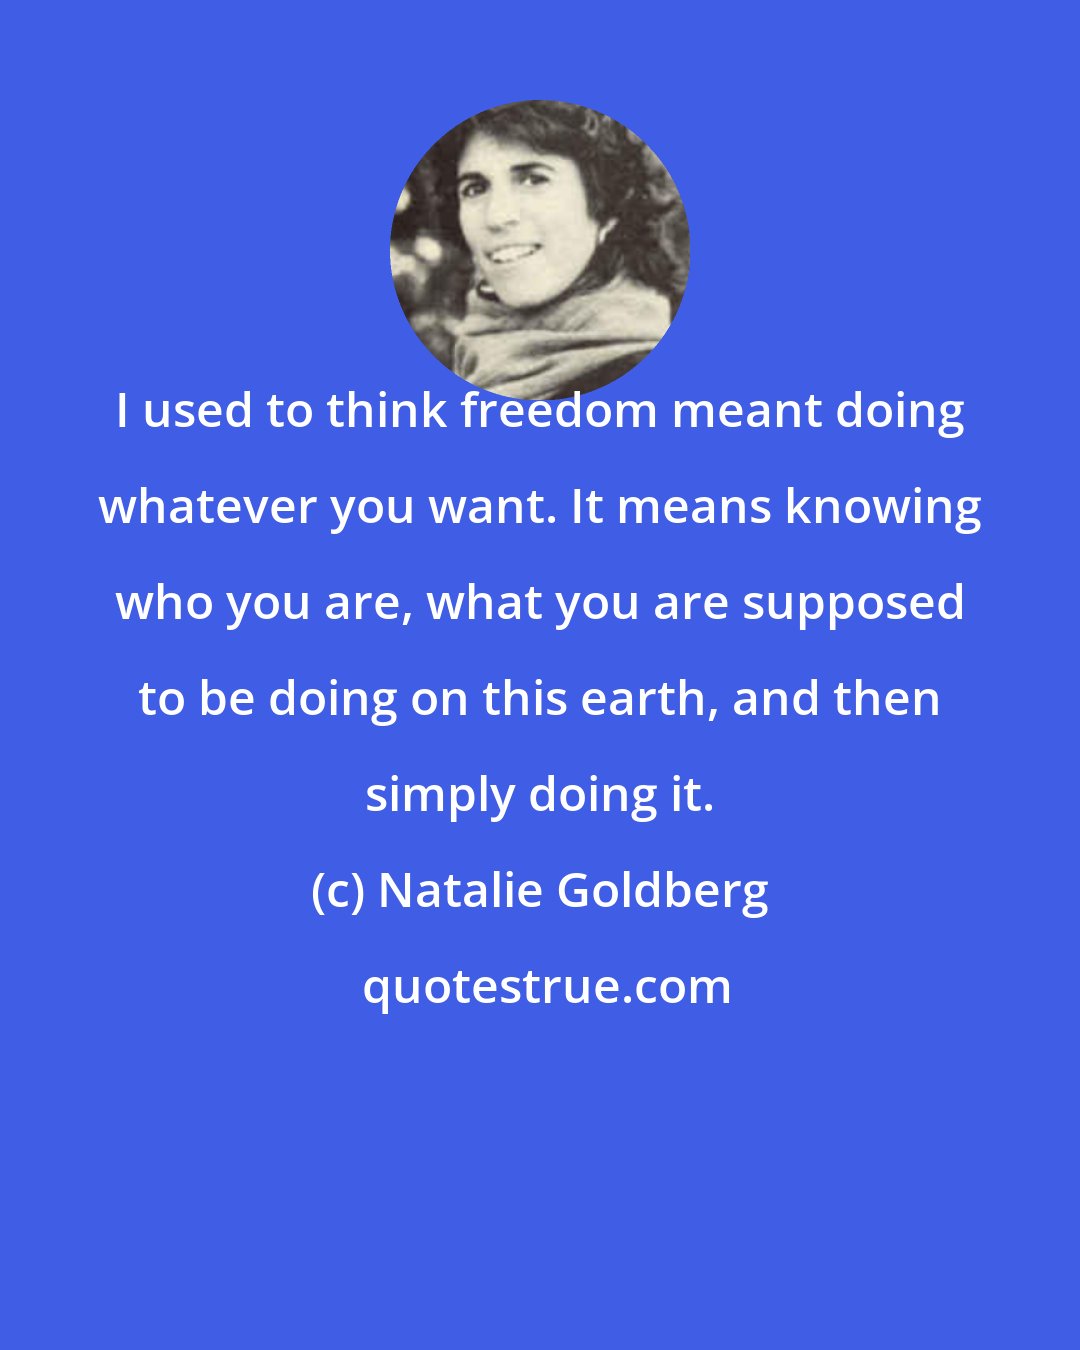 Natalie Goldberg: I used to think freedom meant doing whatever you want. It means knowing who you are, what you are supposed to be doing on this earth, and then simply doing it.